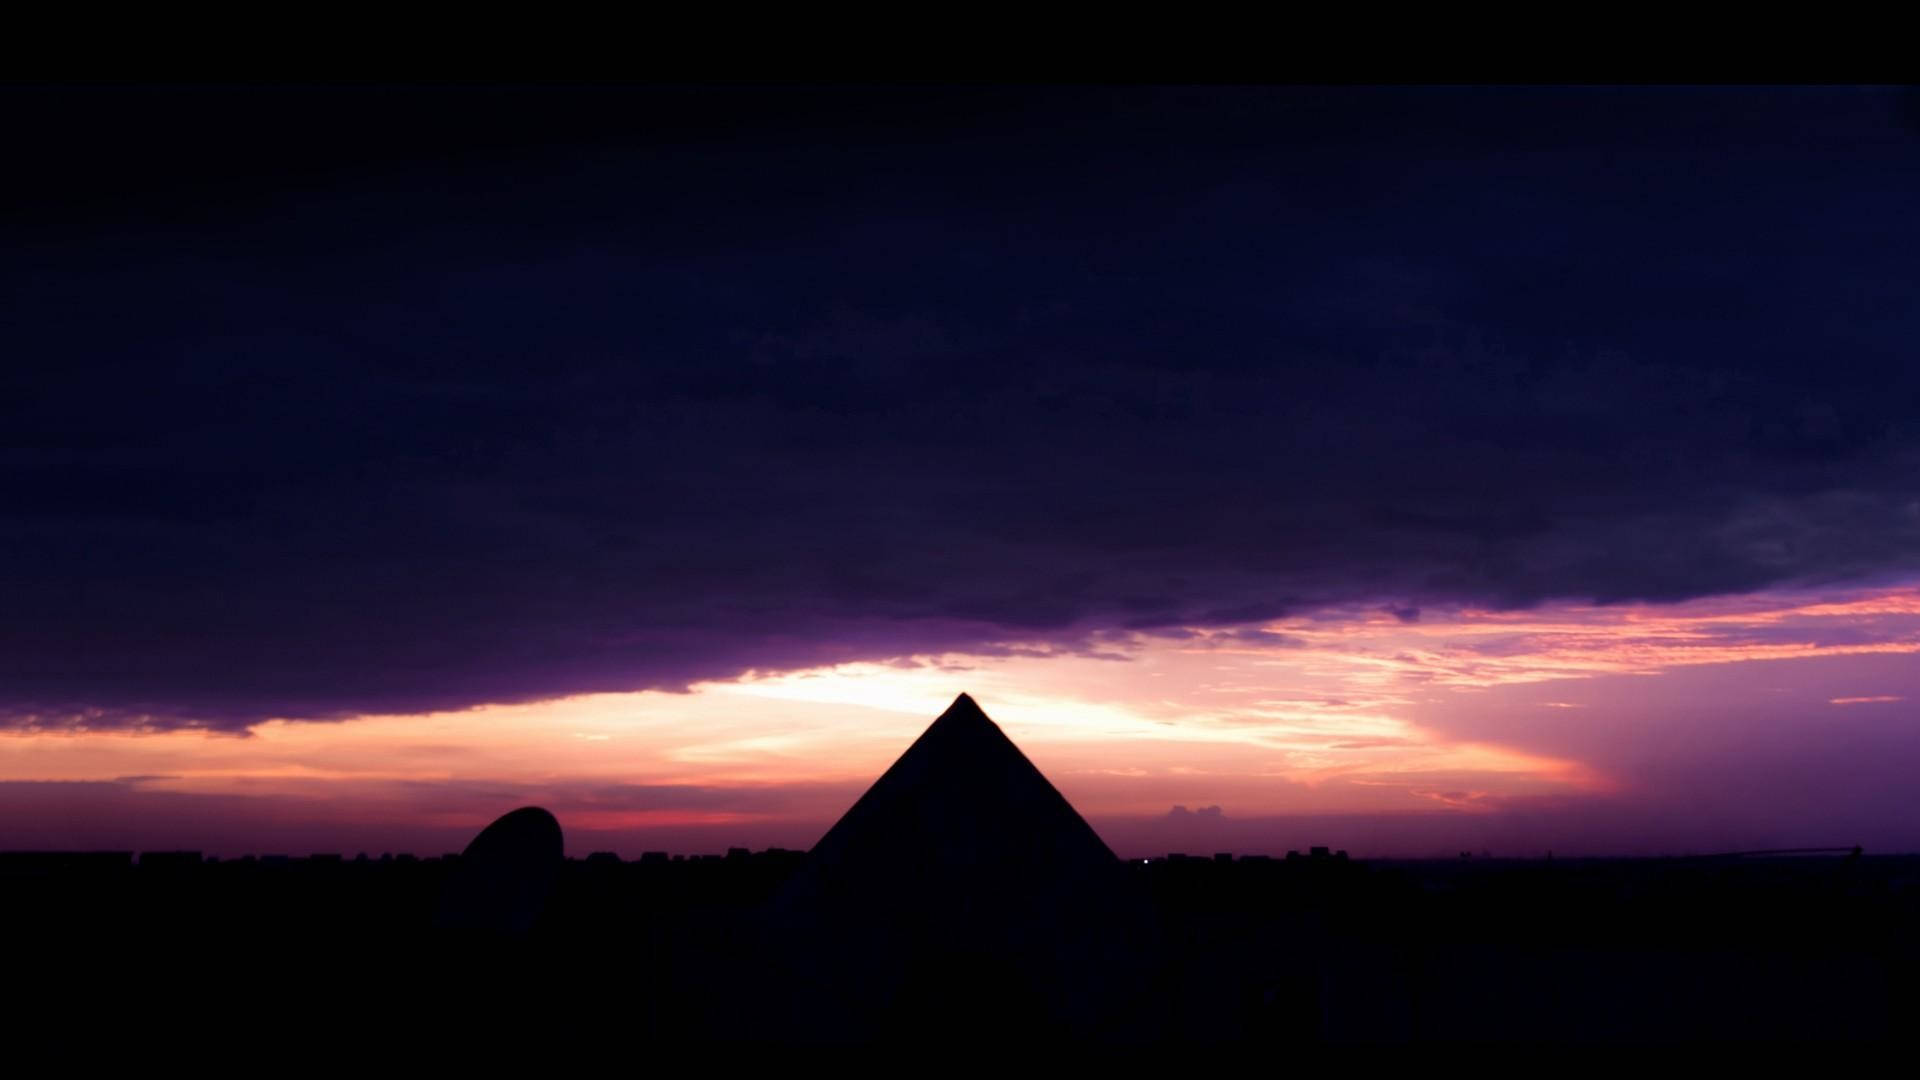 Black Pyramid With Colorful Sky Background